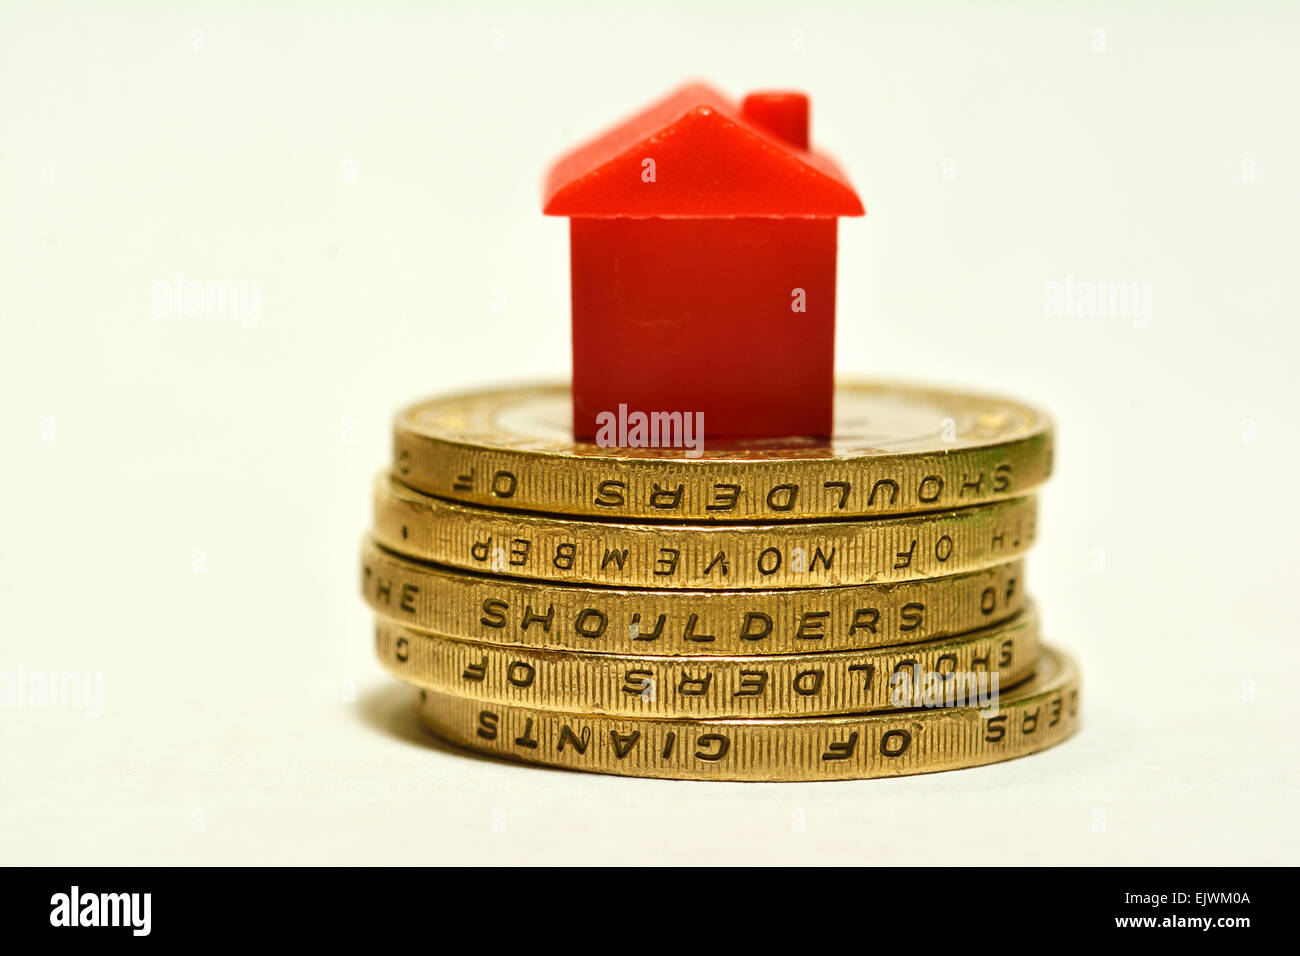 monopoly hotel on stack of two pound coins, Property Market House buying concept Stock Photo